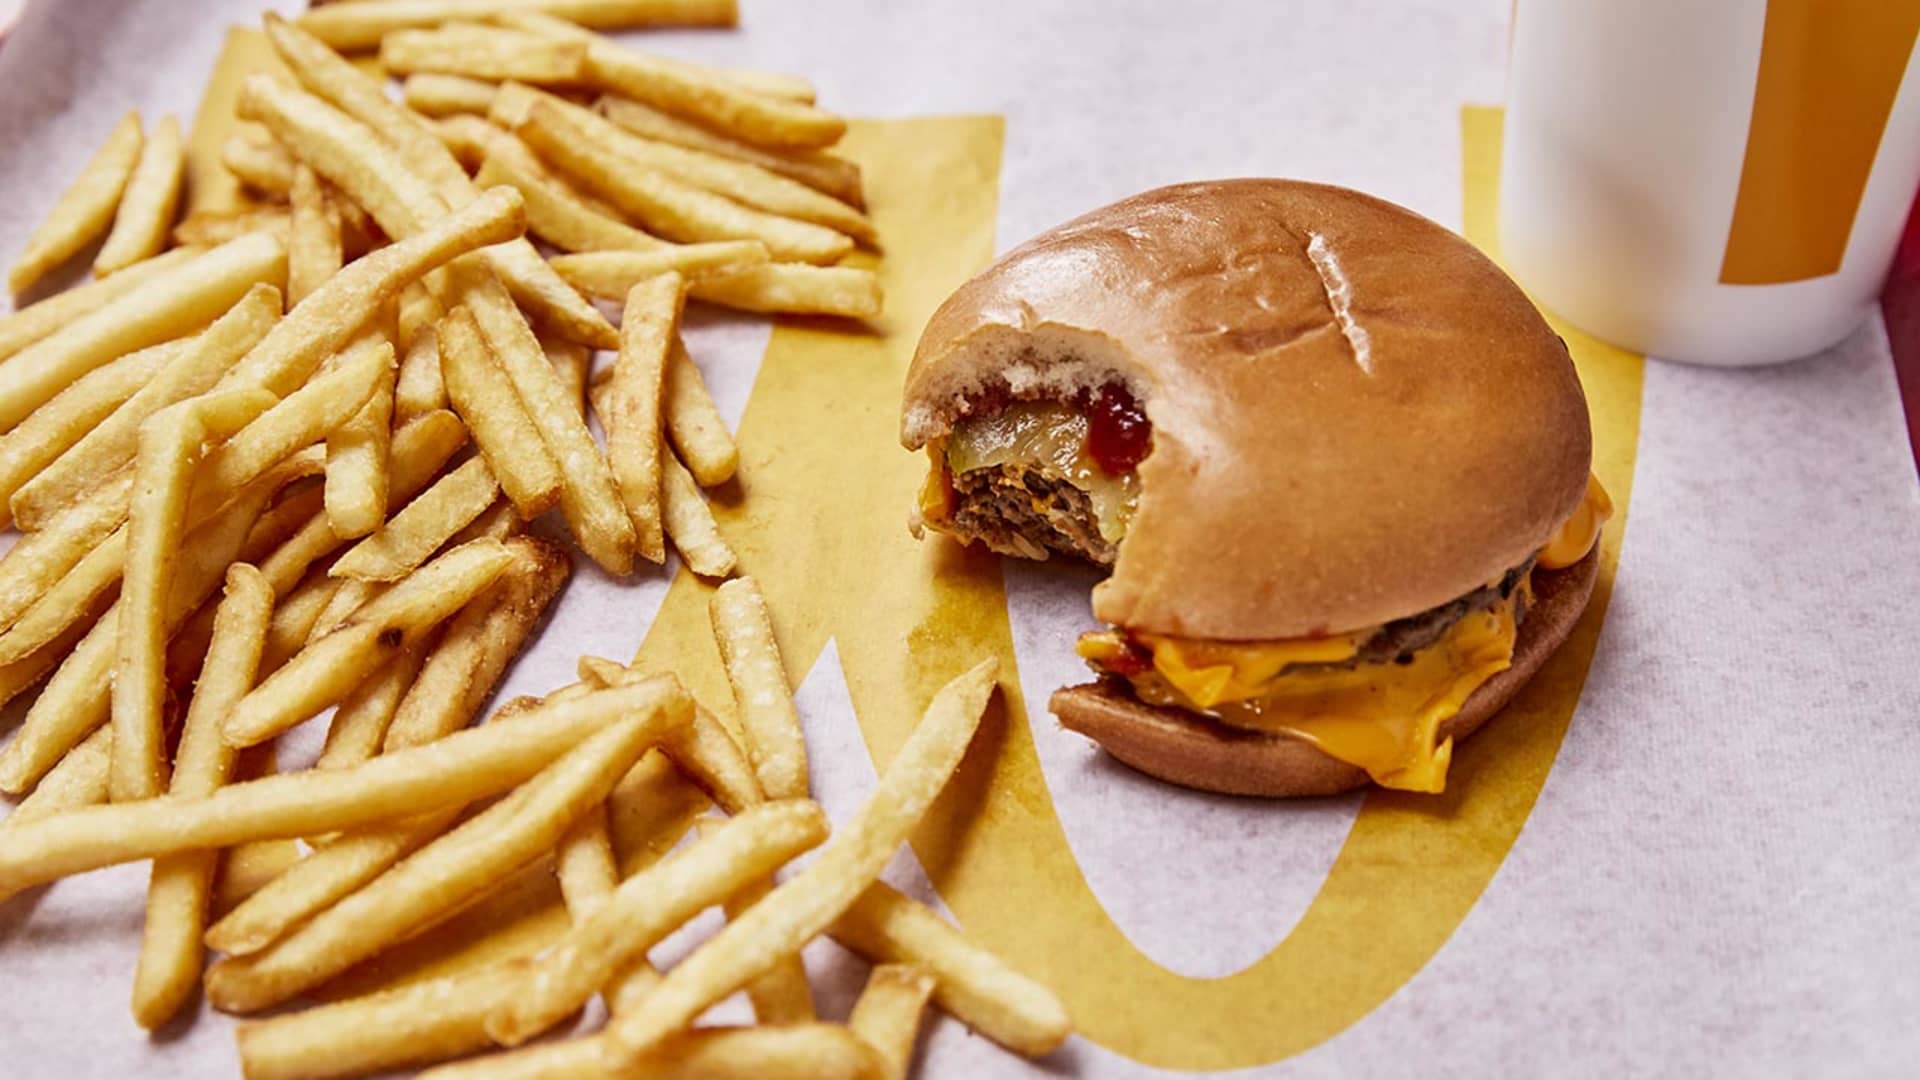 McDonald's is selling 50-cent double cheeseburgers for National Cheeseburger Day, Wendy's is giving them out for a penny - CNBC